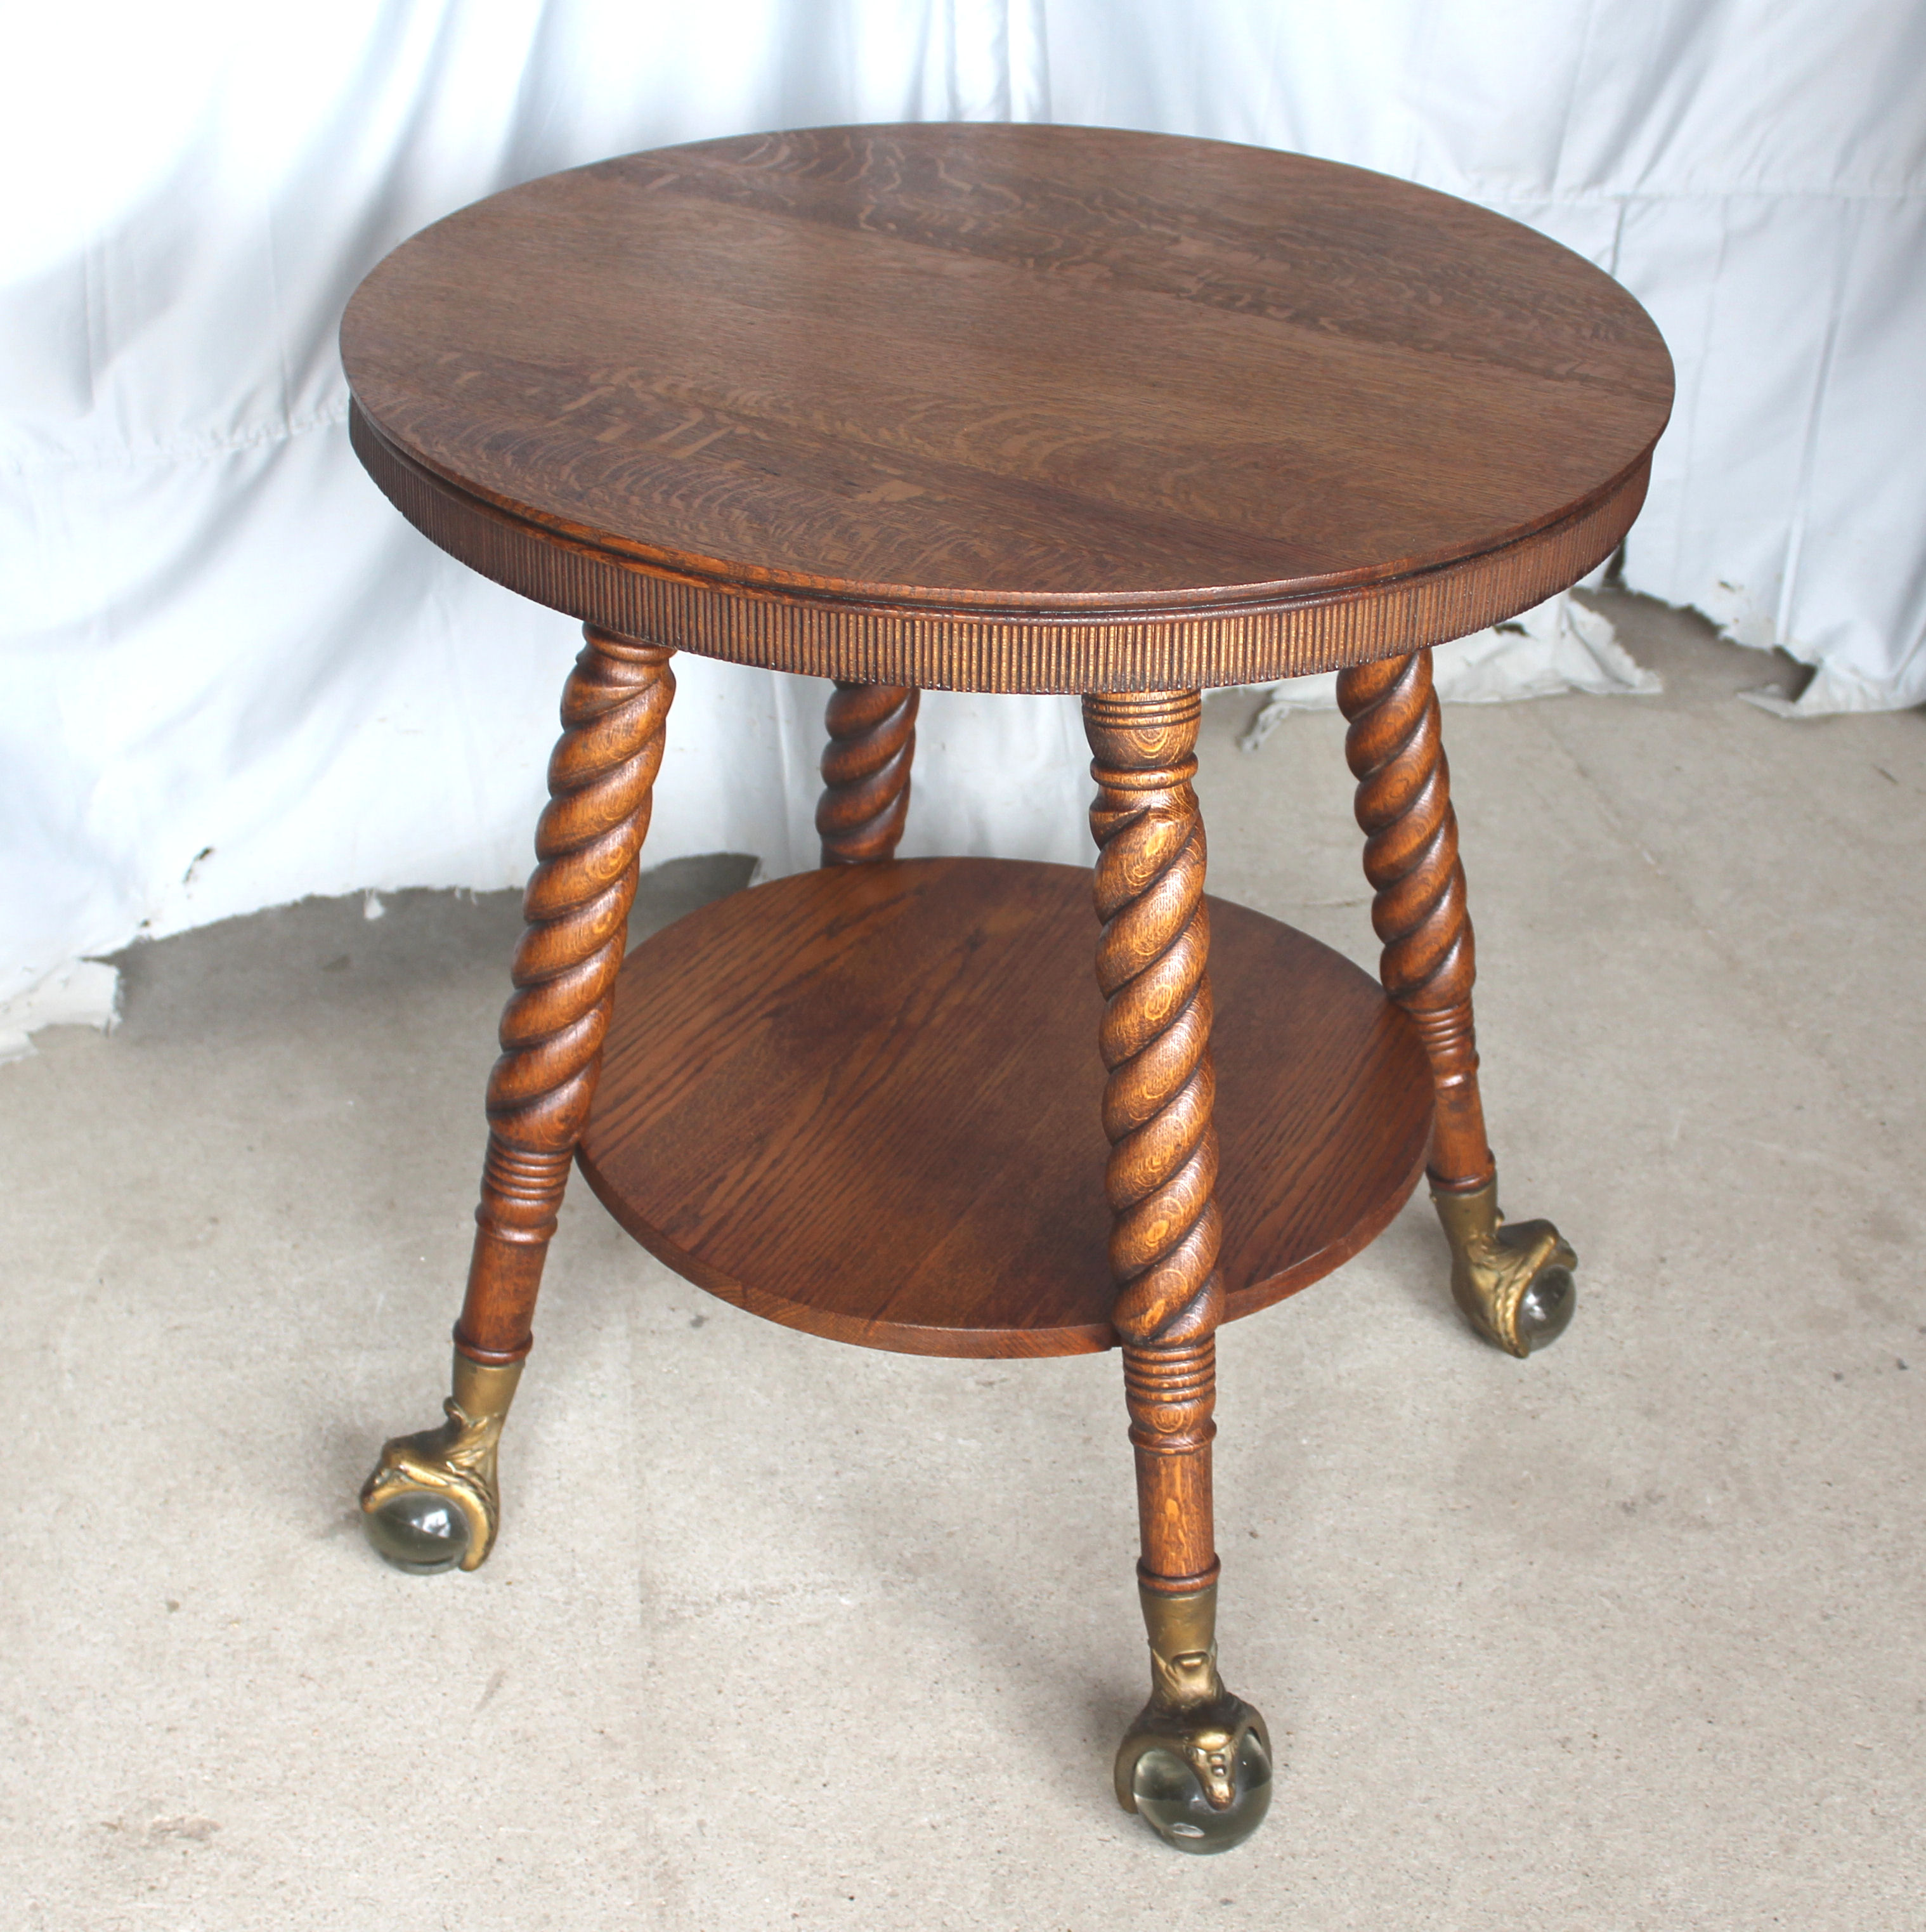 Bargain John S Antiques Antique Round, Antique Round End Table With Claw Feet